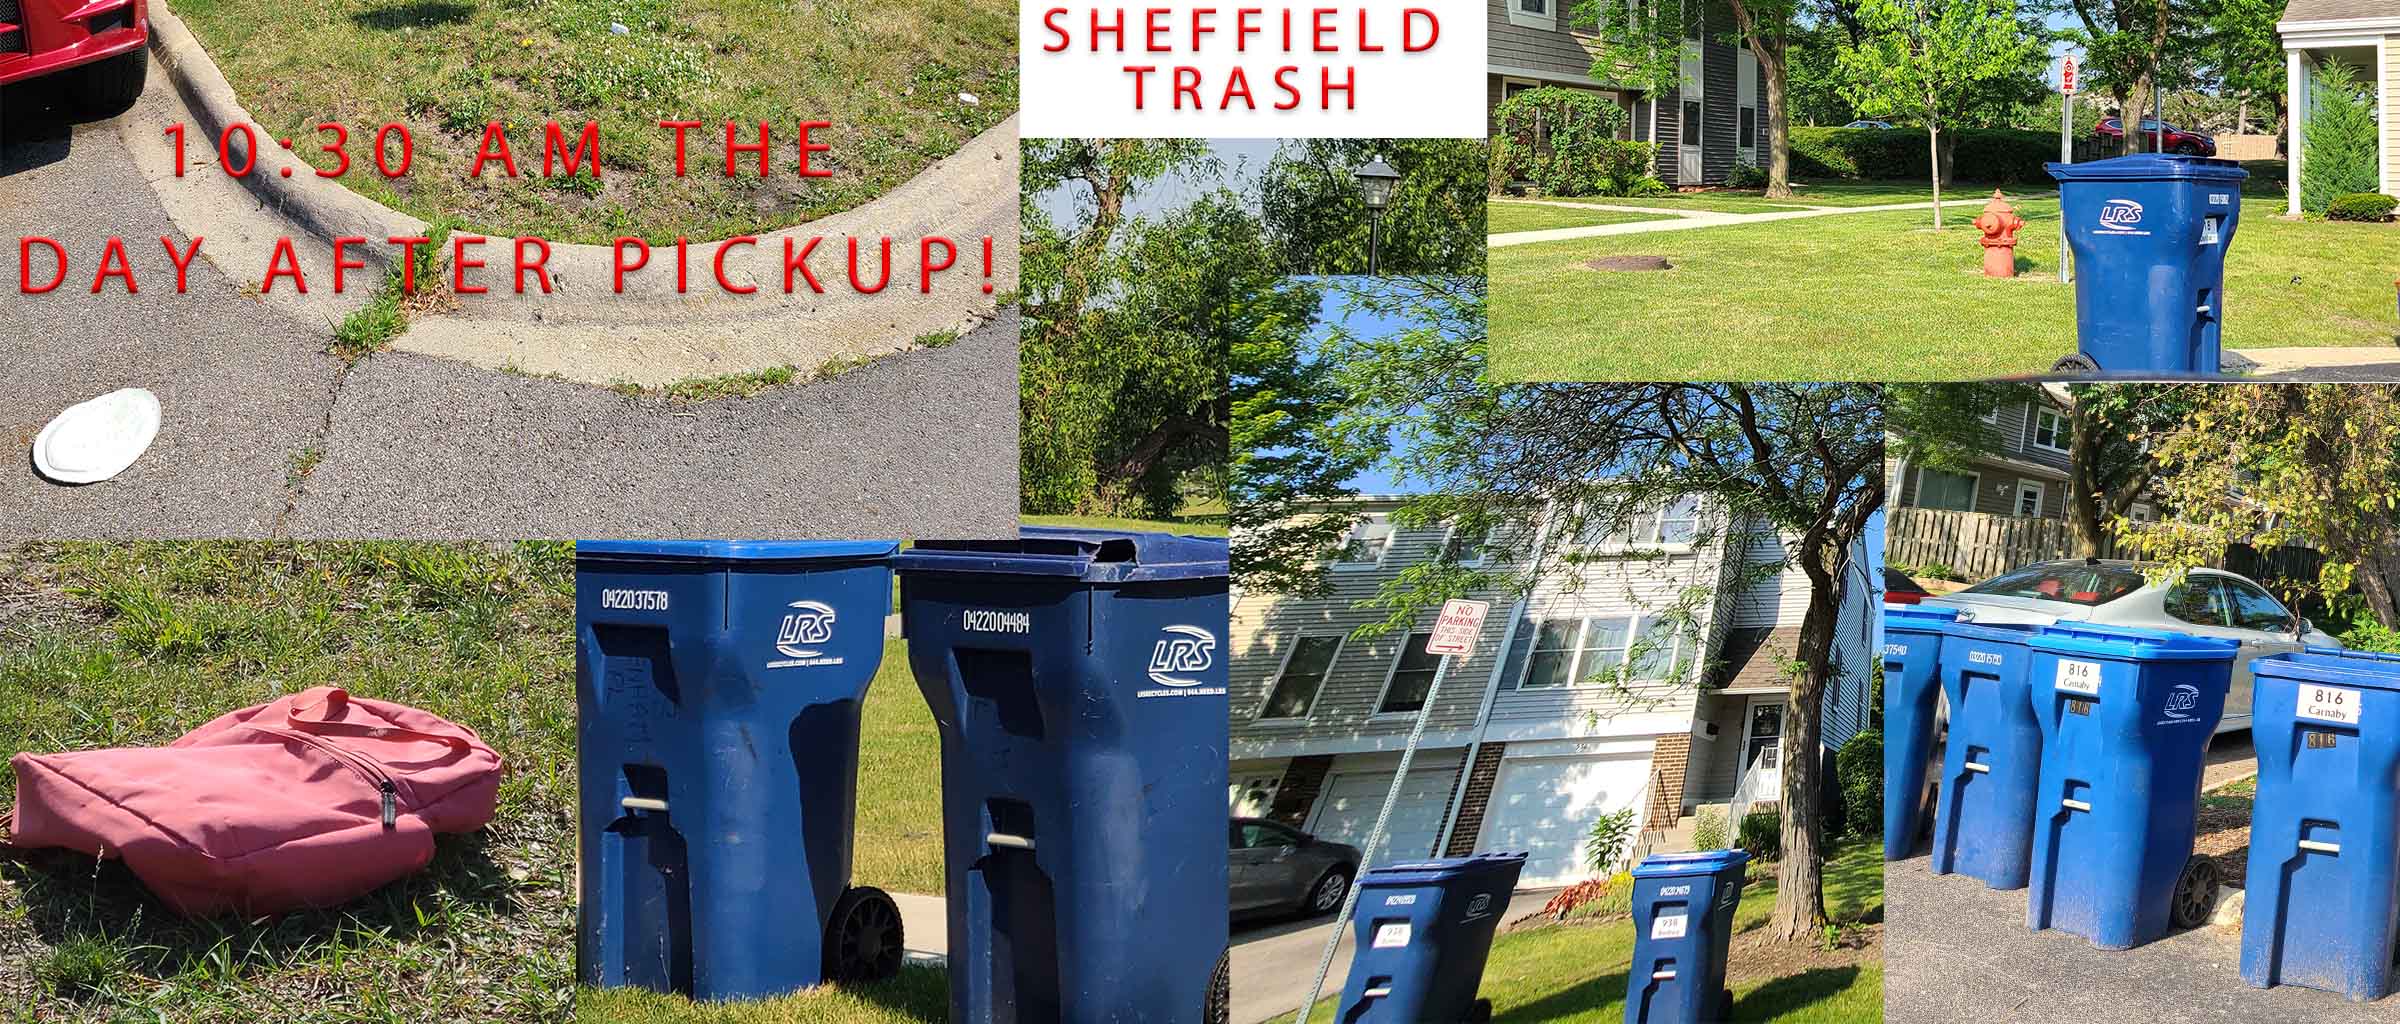 Sheffield Town Home Trash Day After